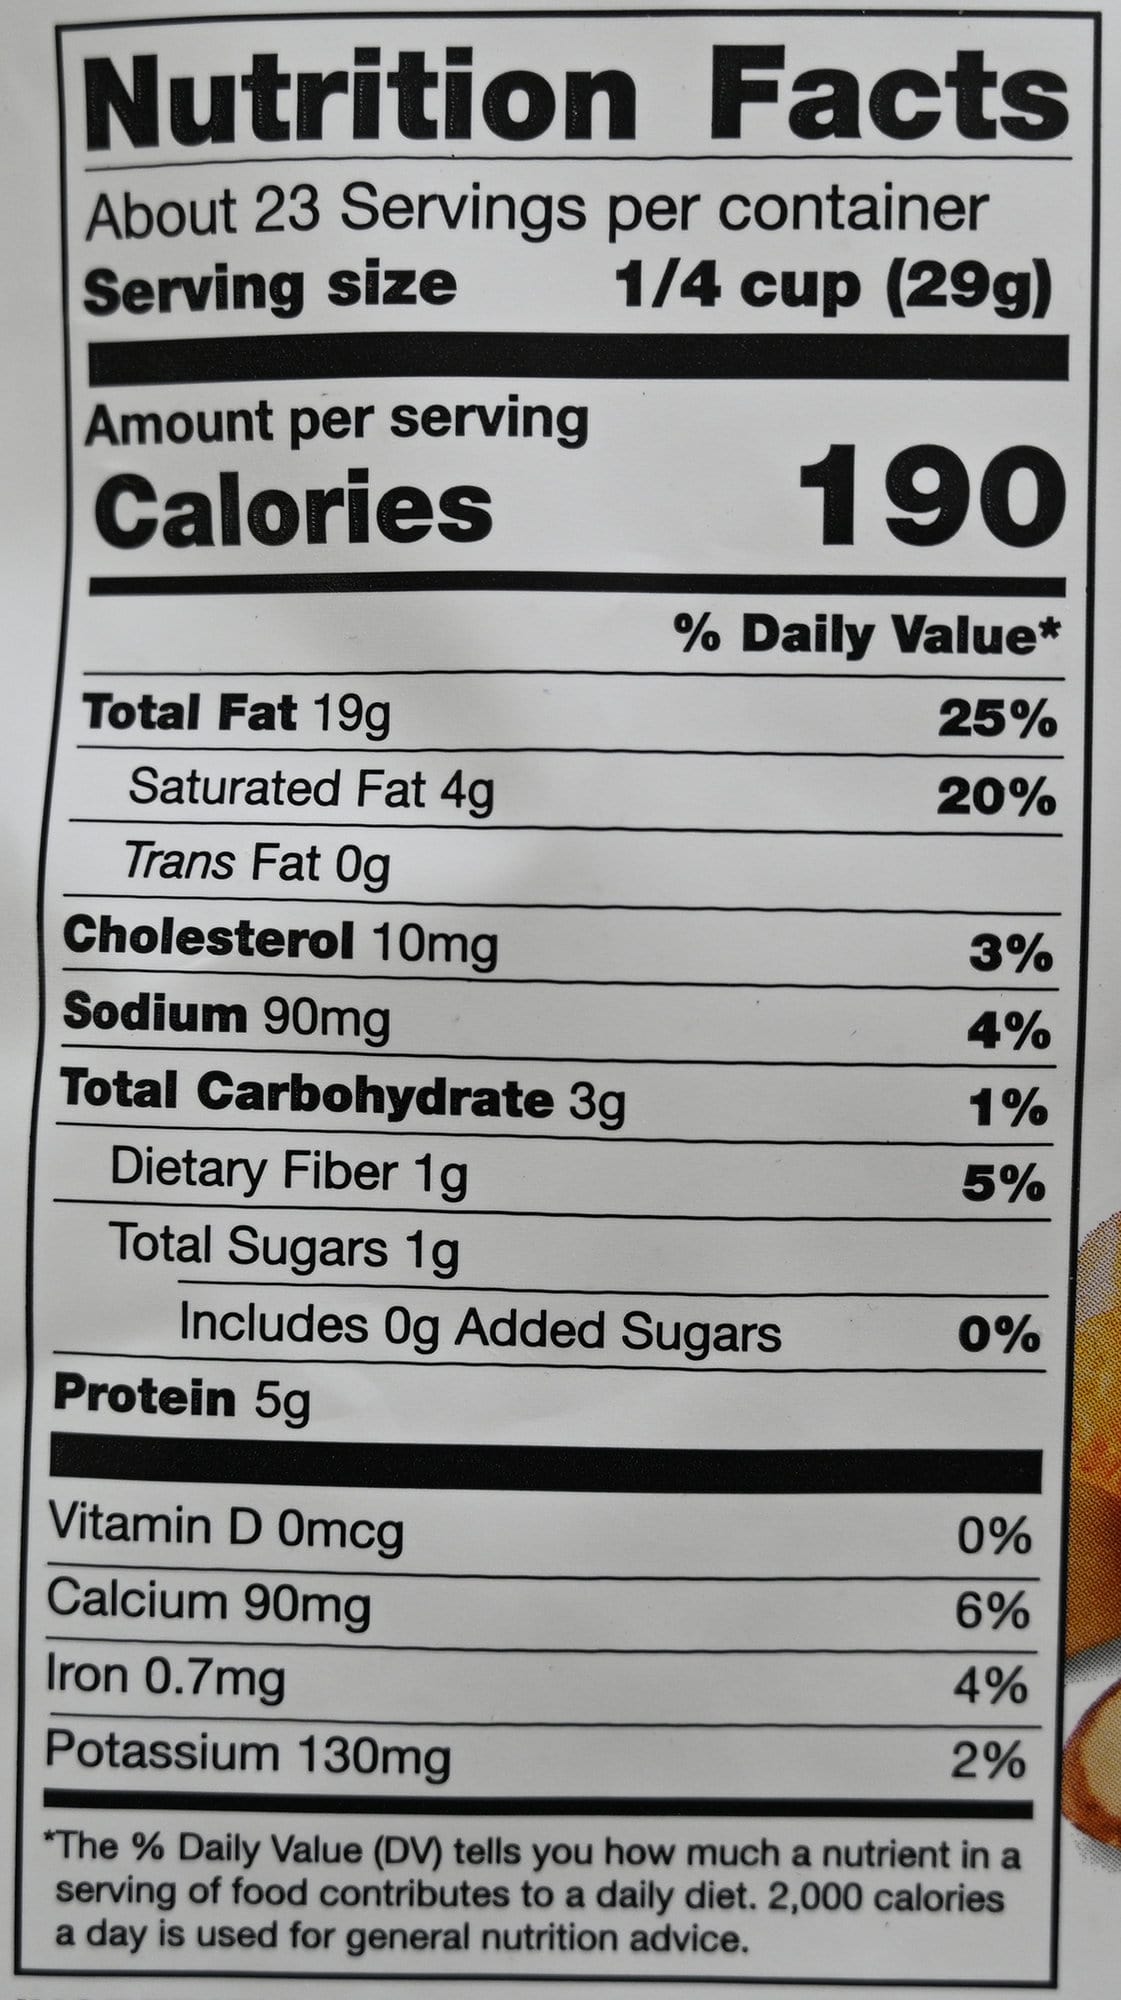 Image of the nutrition facts for the keto mix from the back of the bag.